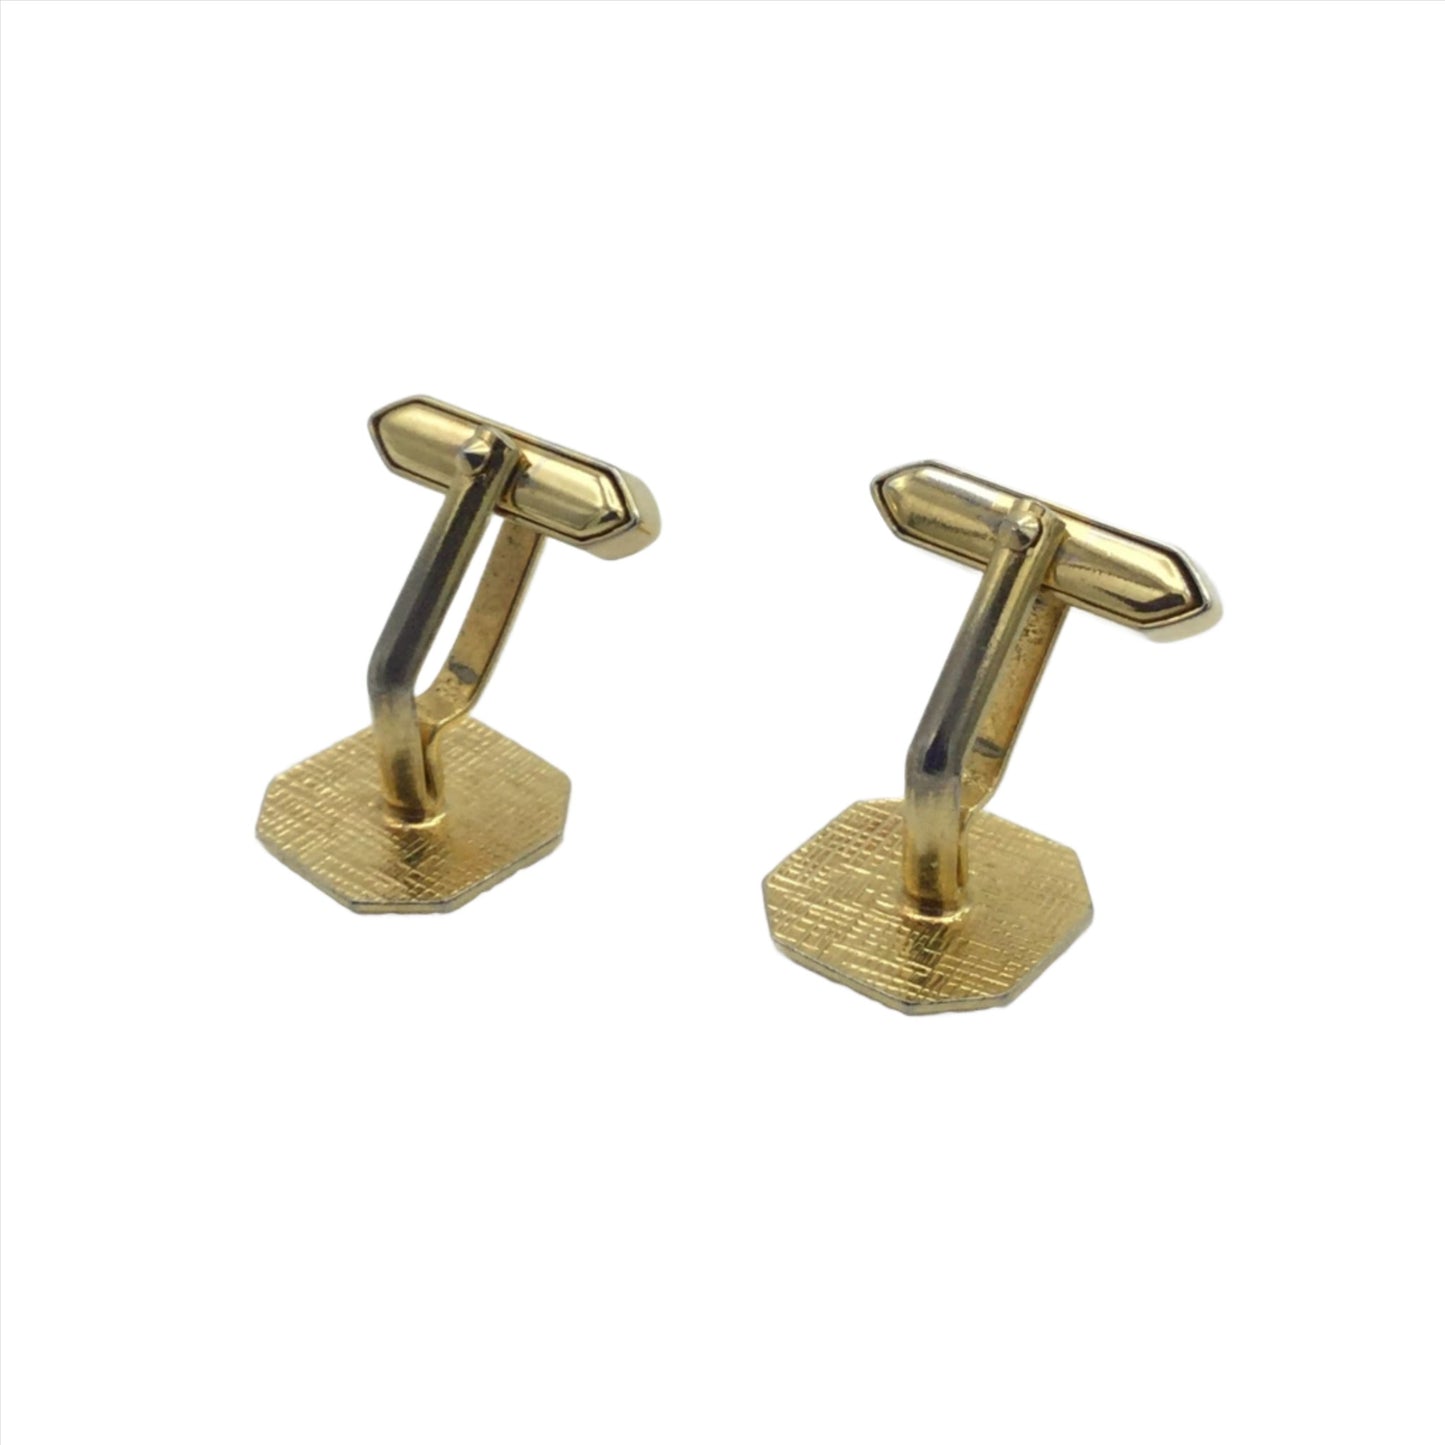 Backs of  the Gilded square cufflinks showing the T bar fastenings